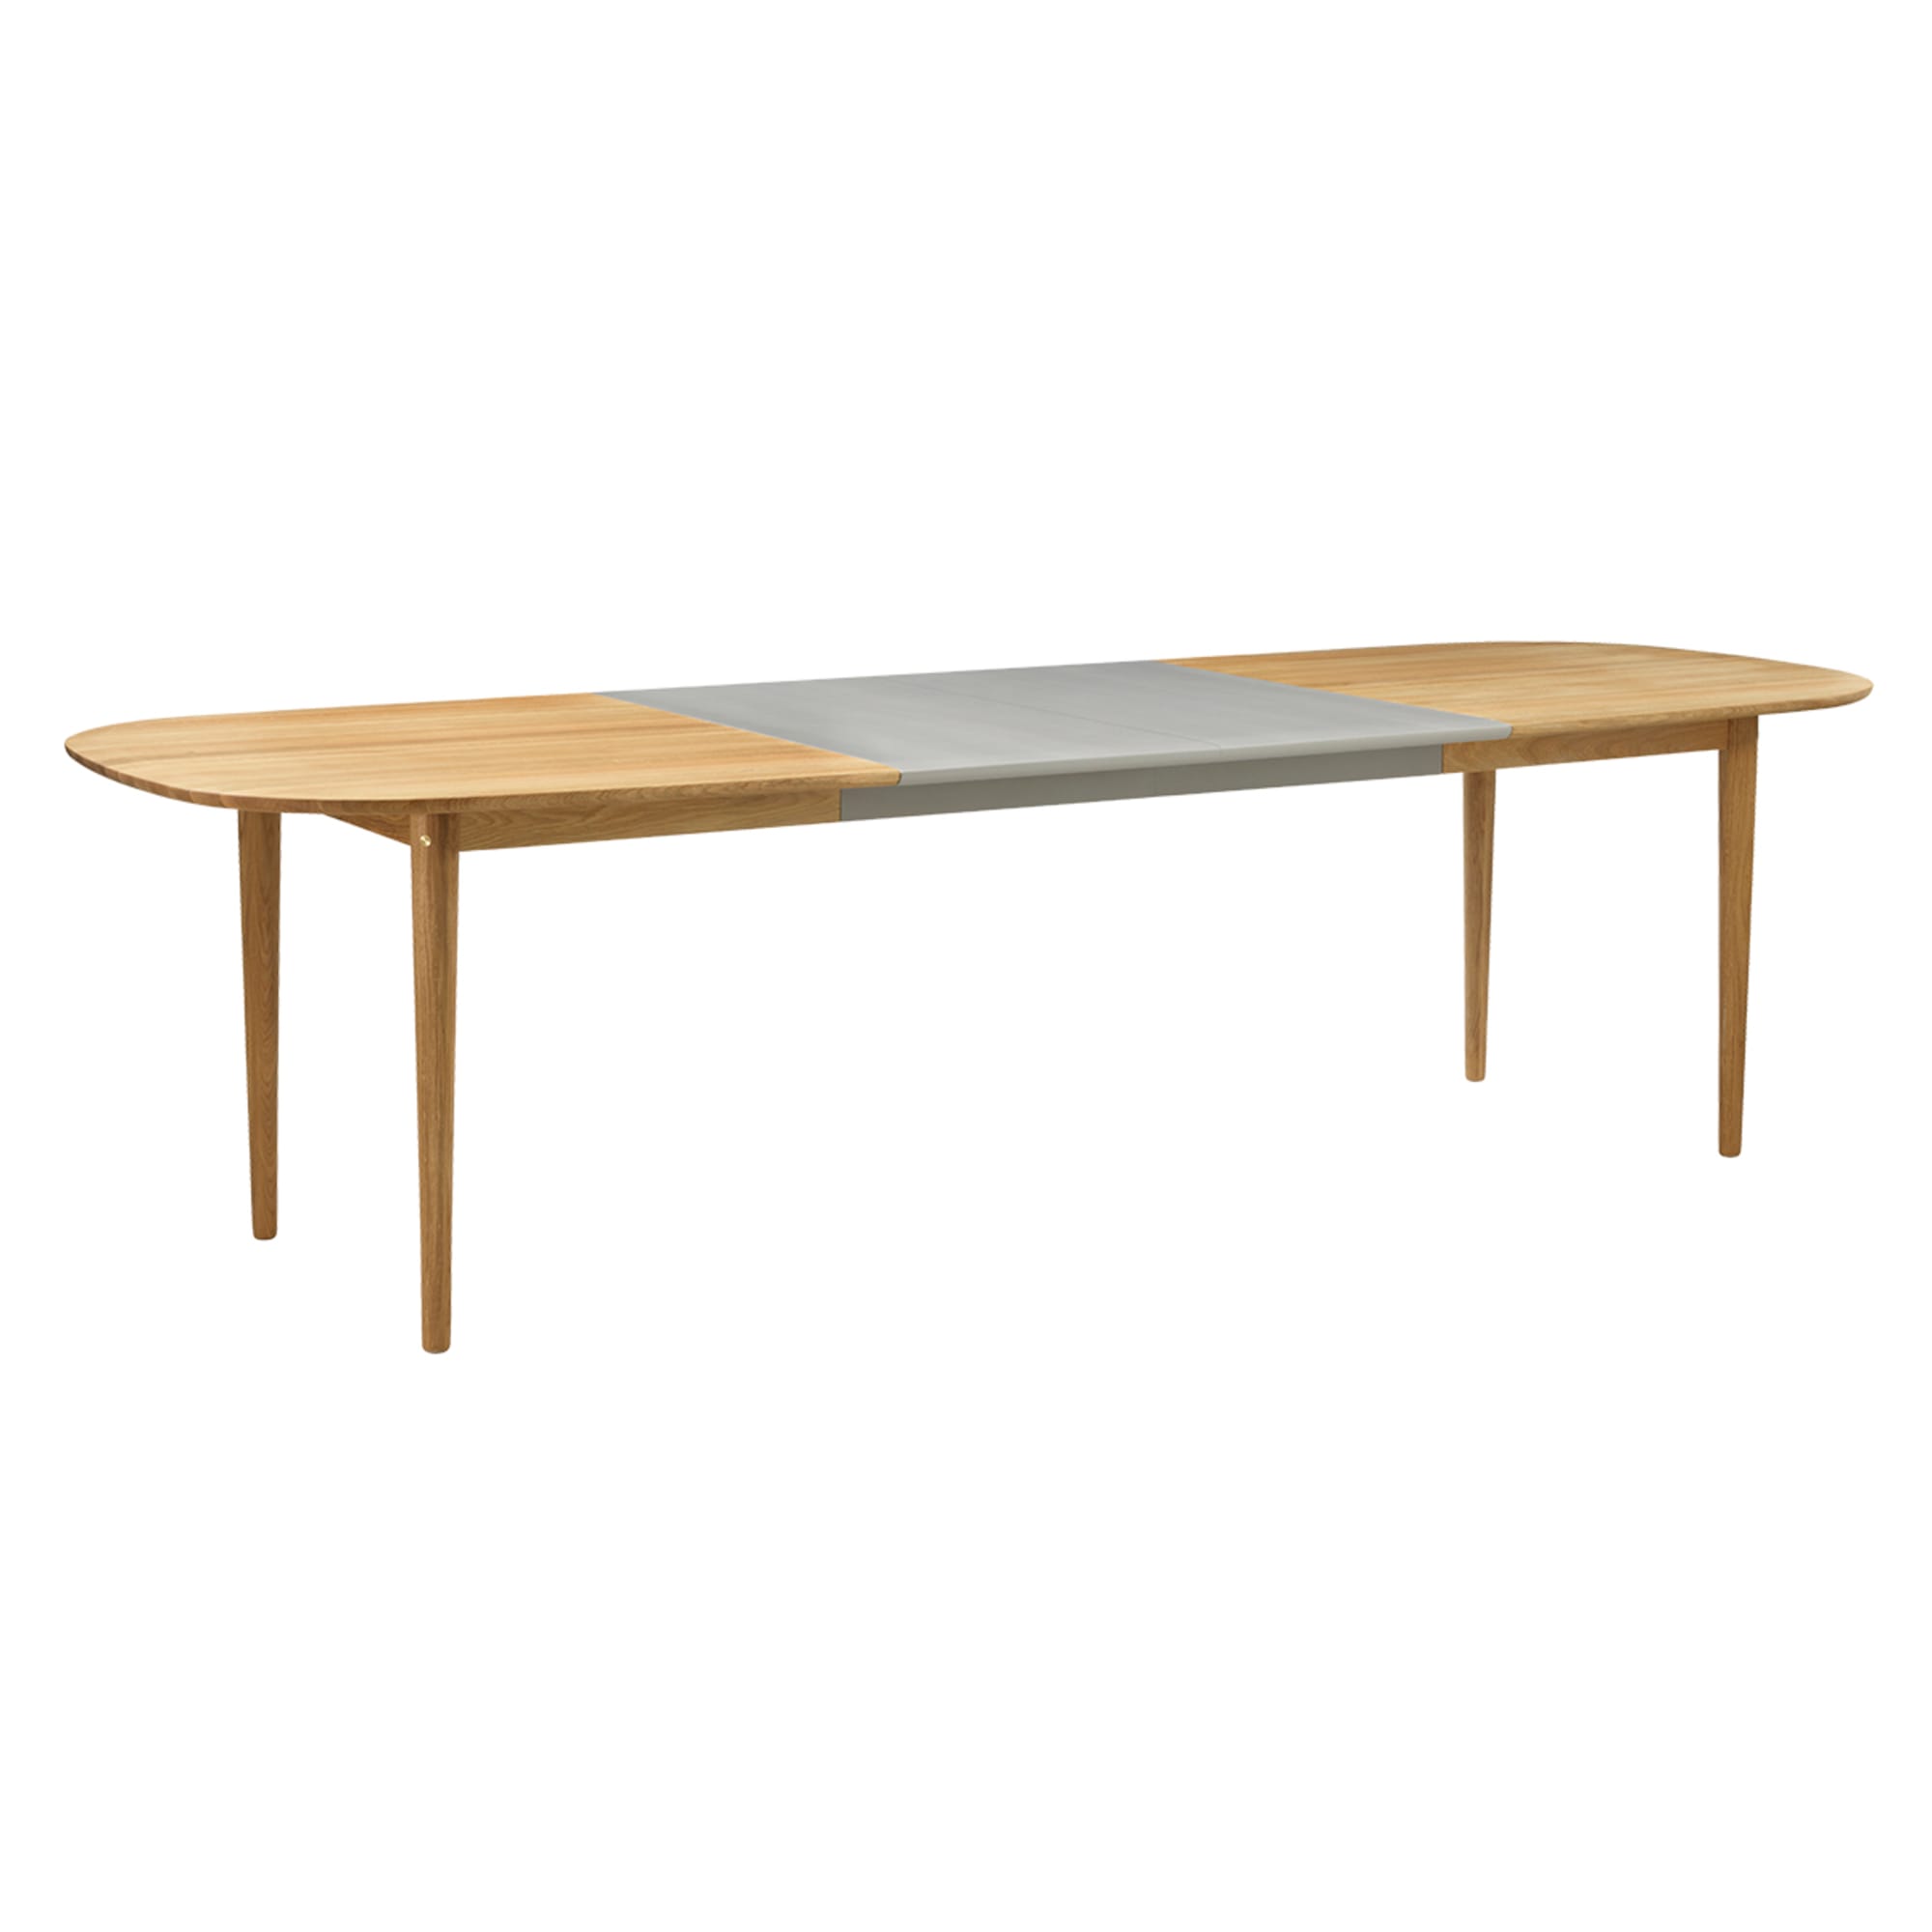 Fdb Møbler C63 E Dining Table With Pull Out Function, Oak